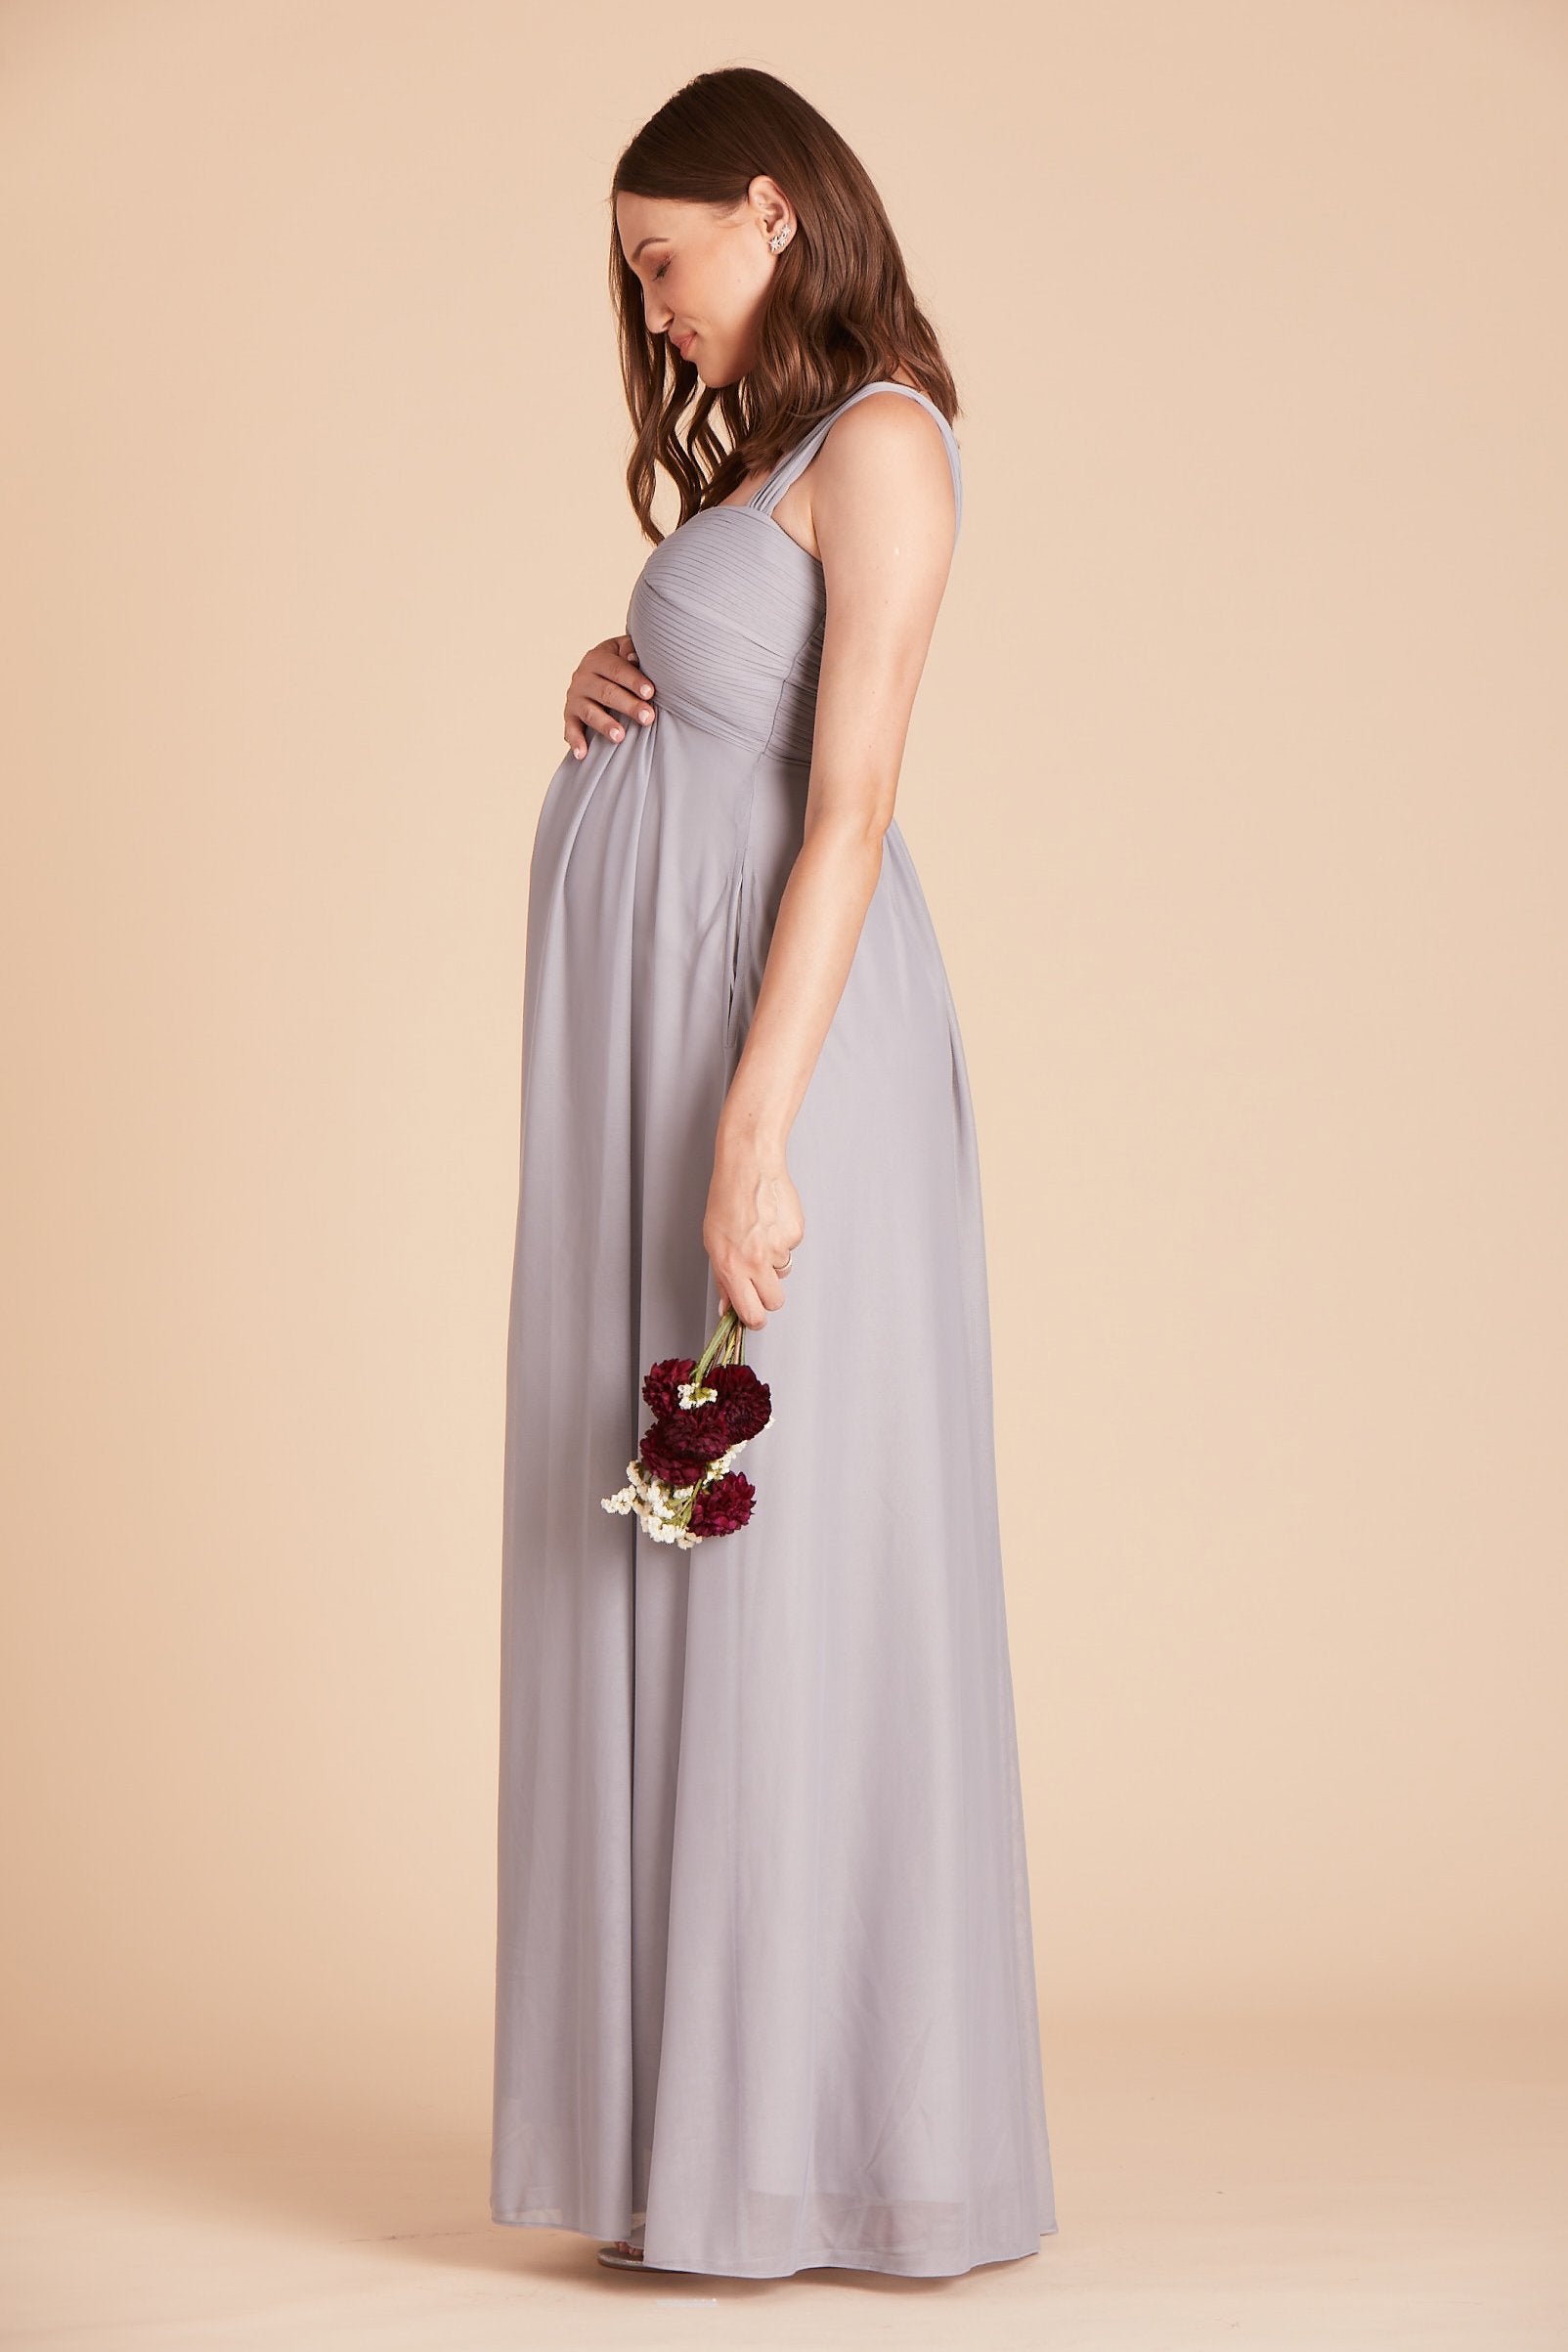 Maria convertible bridesmaids dress in silver mesh by Birdy Grey, side view